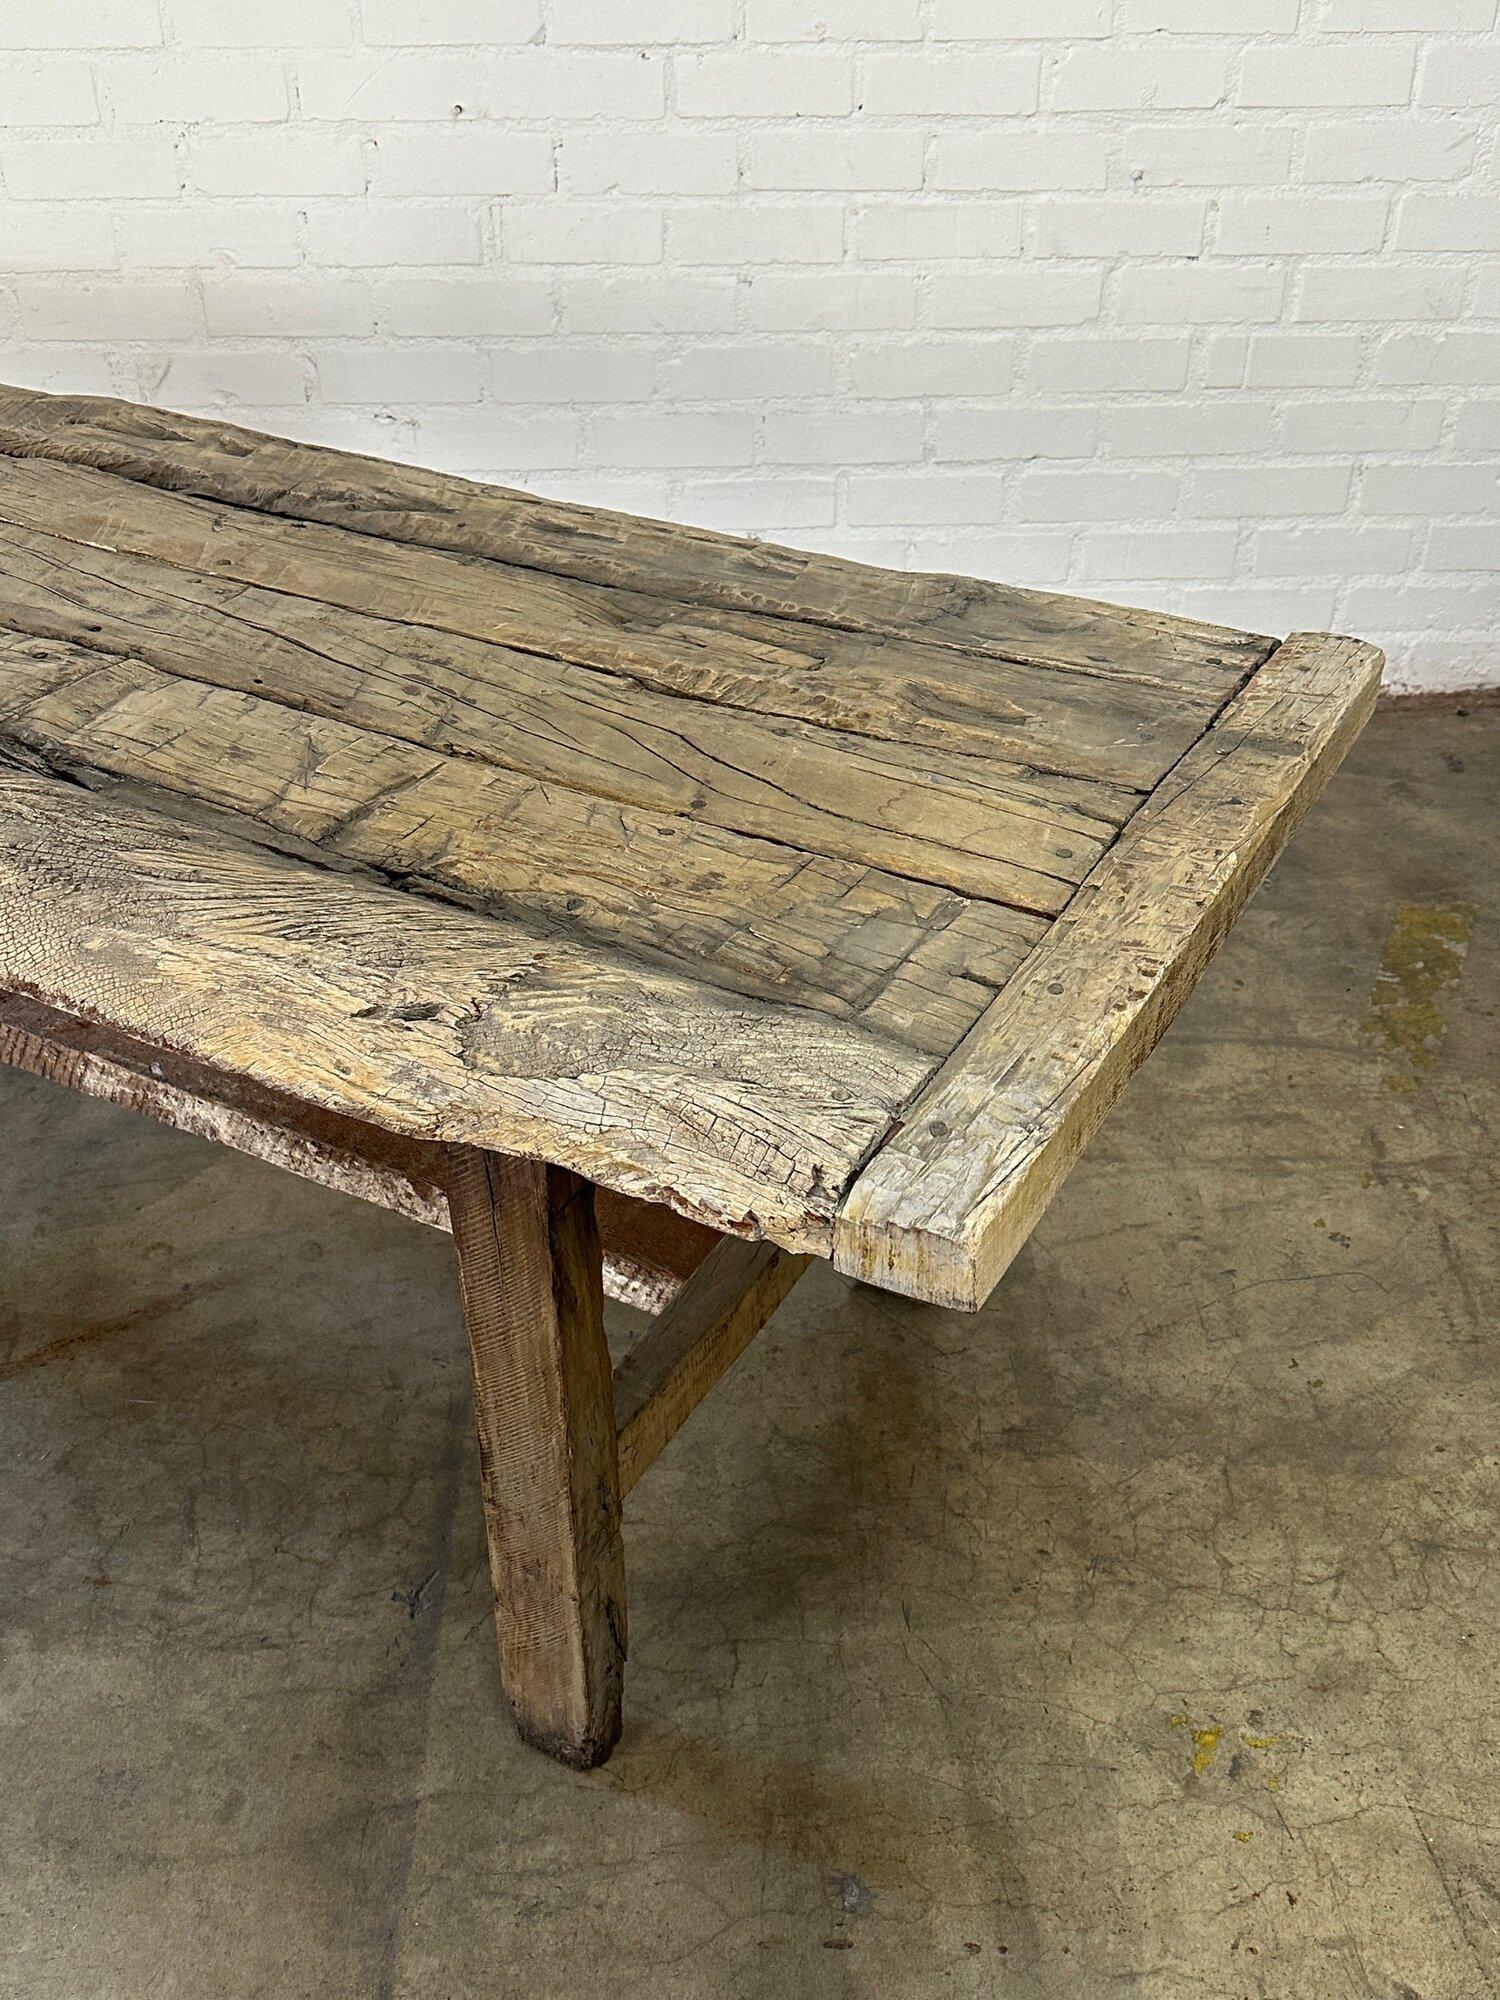 W82 D37 H31 KC28.5

Vintage very early primitive dining table. Item is all original and has been reinforced by our in huse artisans. Item is sturdy and structurally sound. This table shows natural wear and patina from decades of wear.

Please note